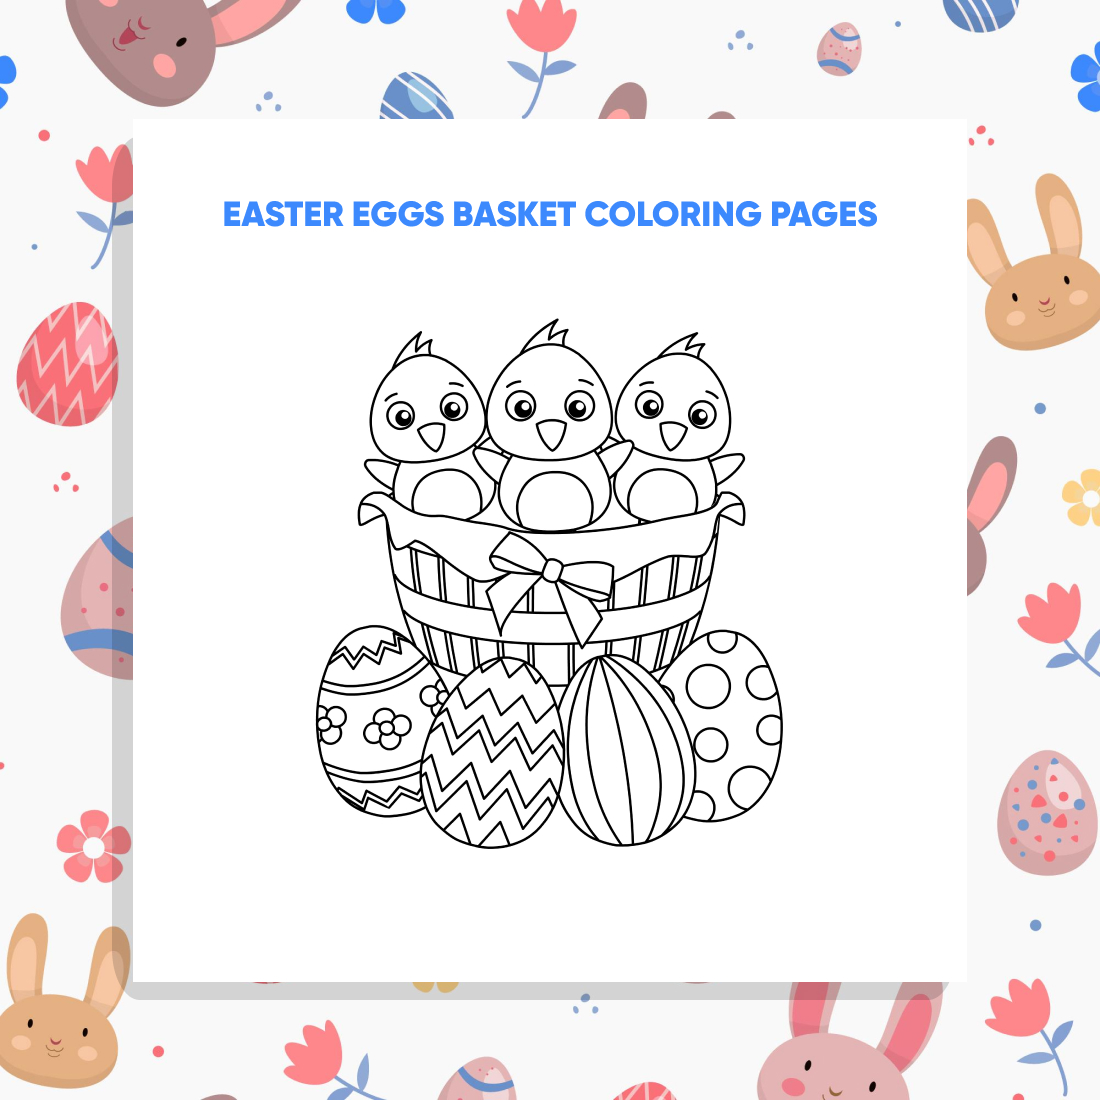 Easter Eggs Basket Coloring Pages preview image.